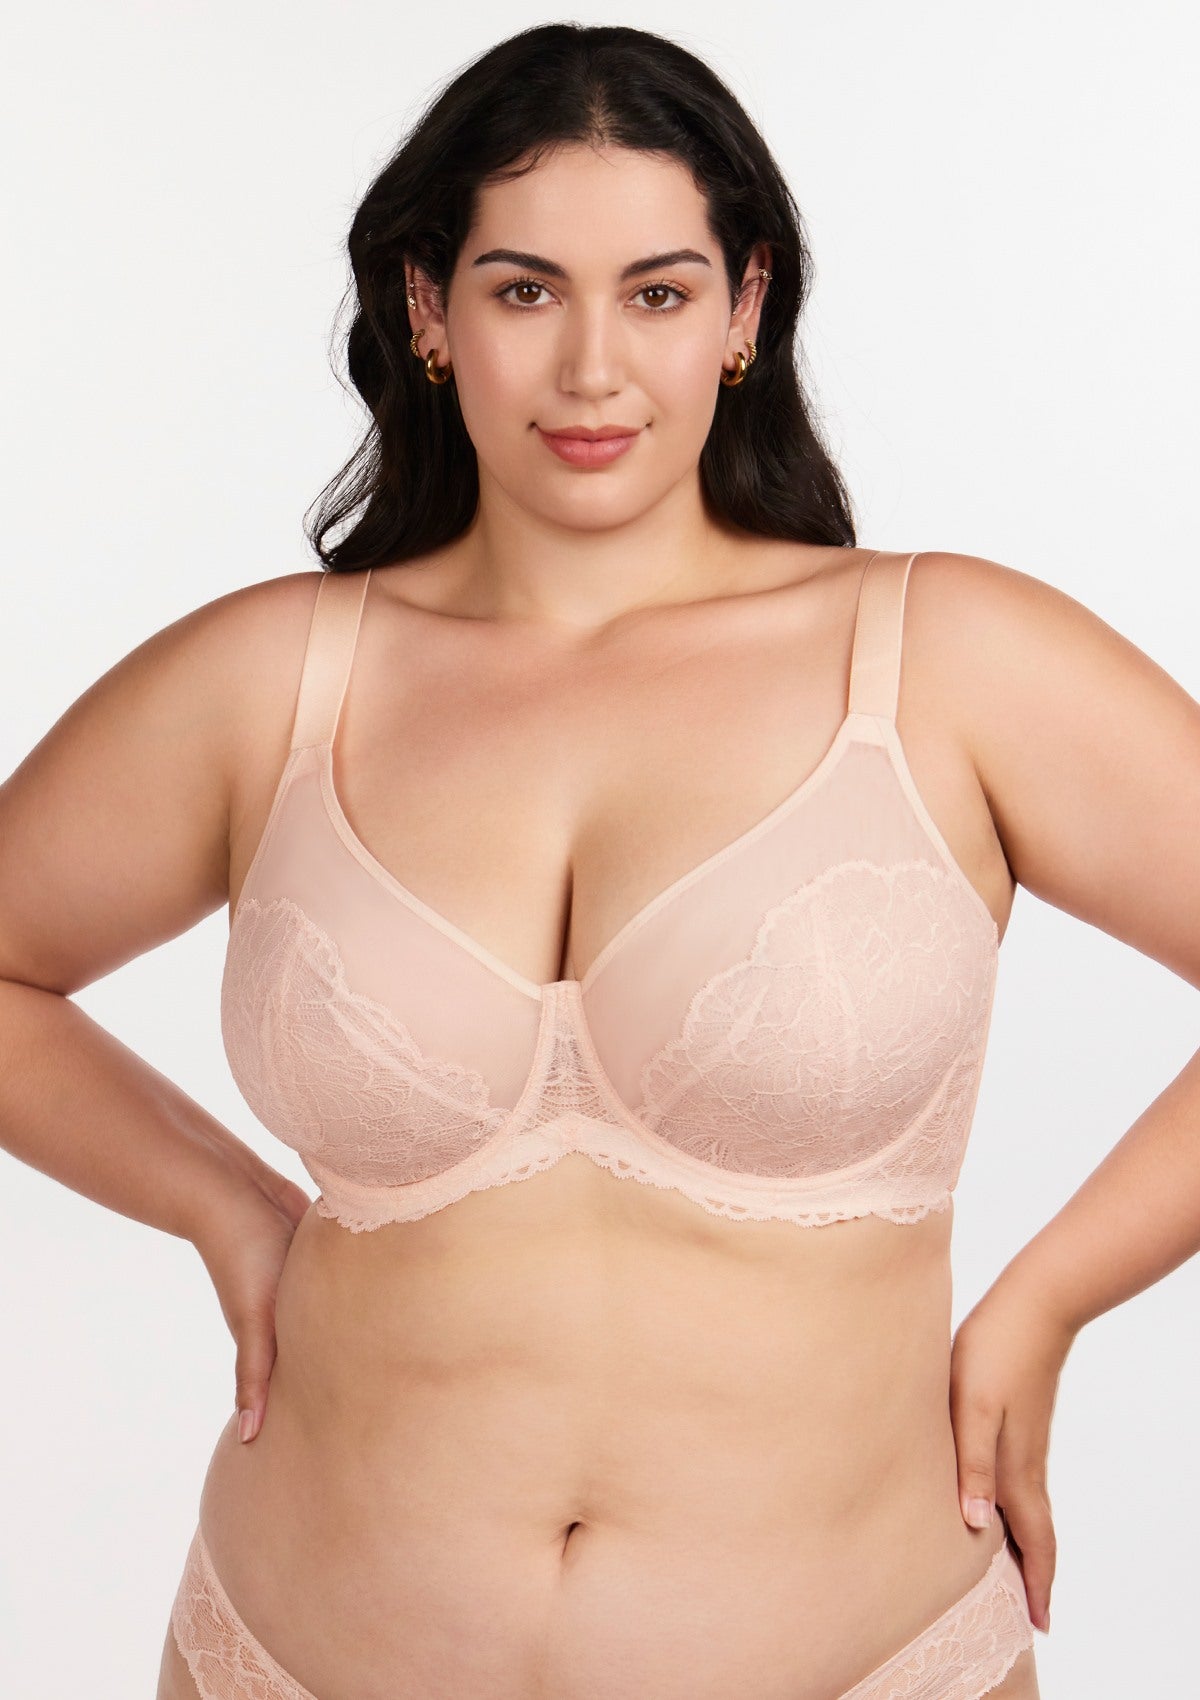 HSIA Blossom Sheer Lace Bra: Comfortable Underwire Bra For Big Busts - Dusty Peach / 38 / C